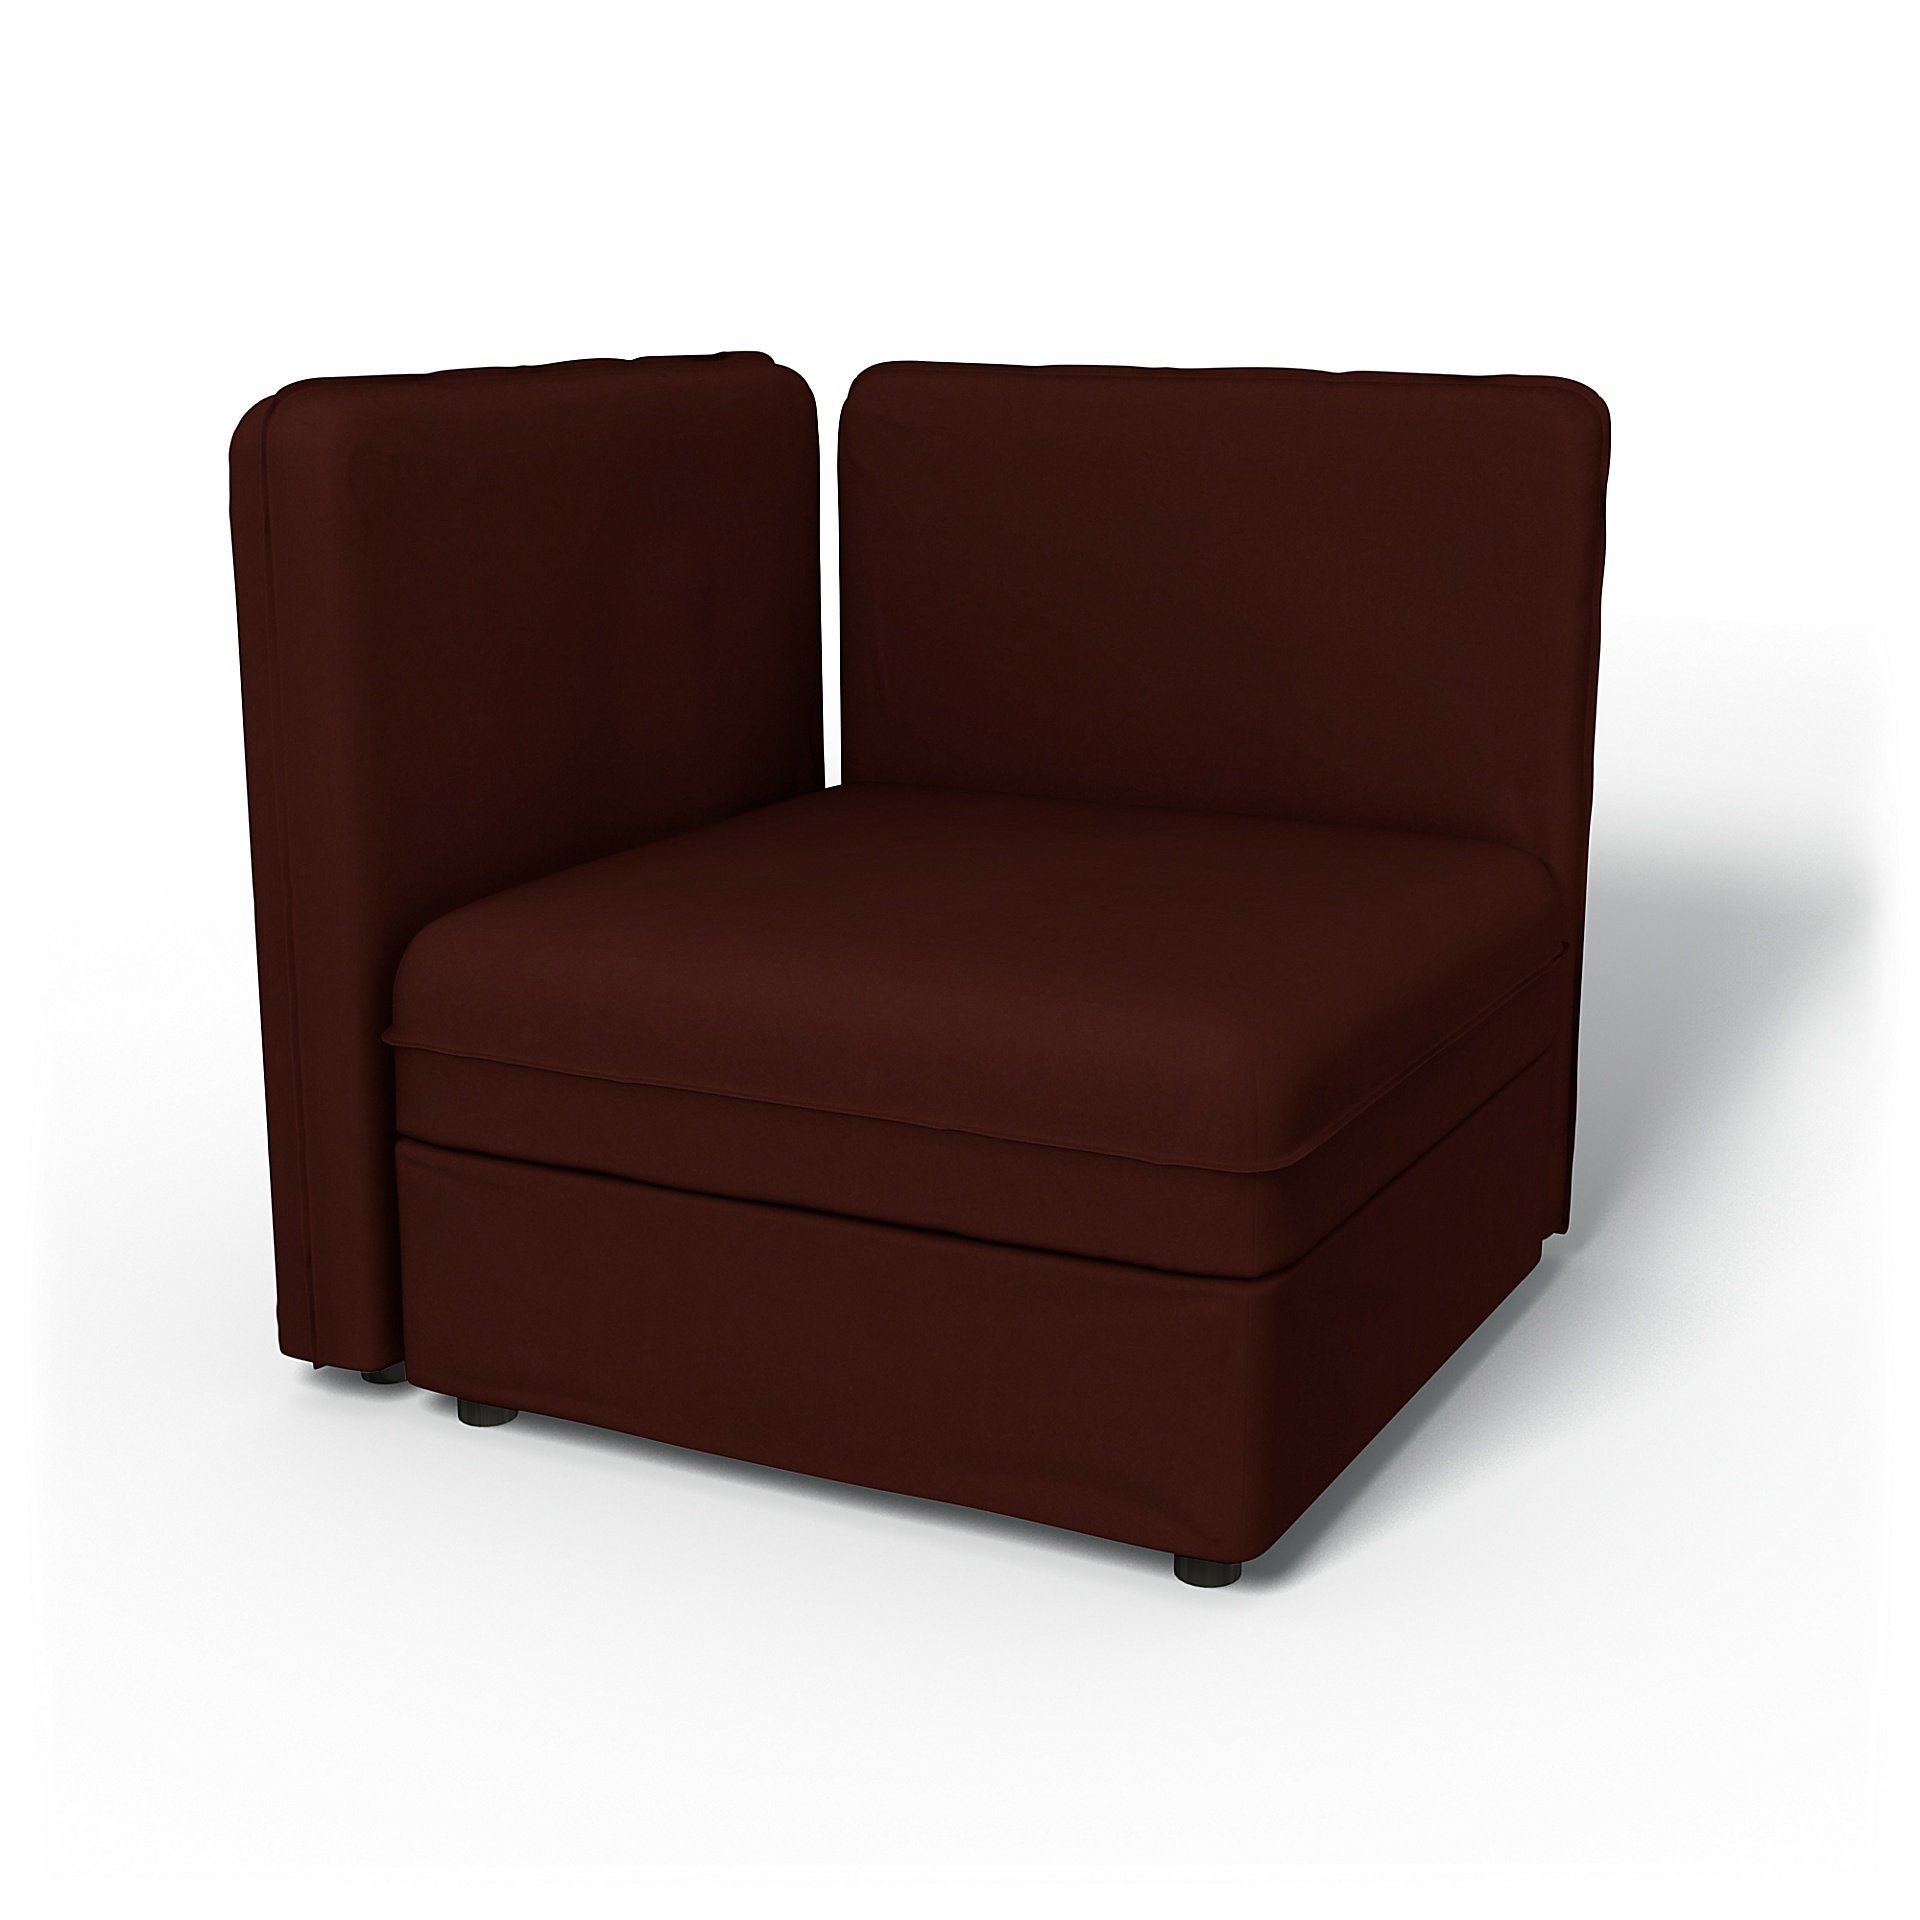 IKEA - Vallentuna Seat Module with Low Back and Storage Cover 80x80cm 32x32in, Ground Coffee, Velvet